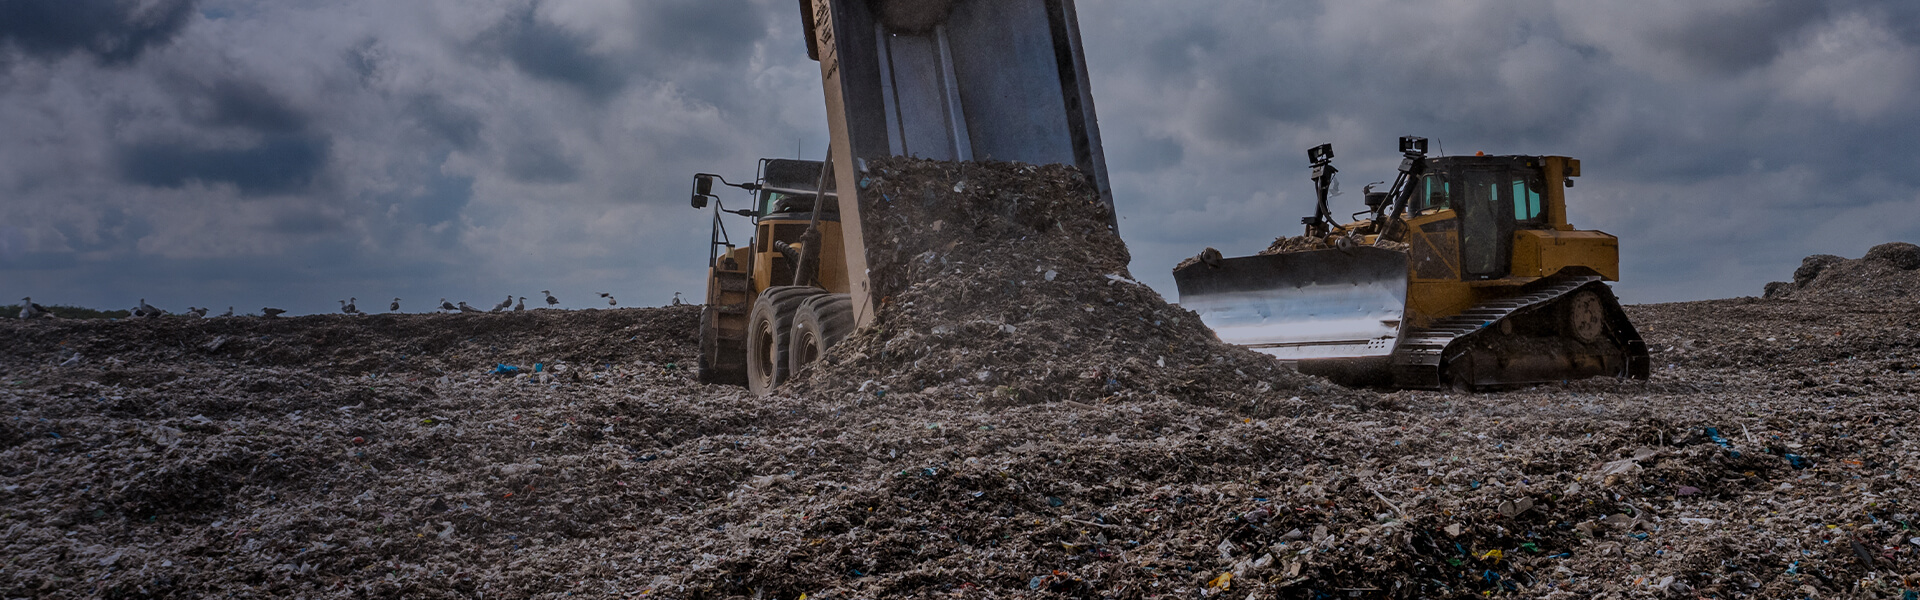 Image of a tipper truck tipping waste onto landfill site